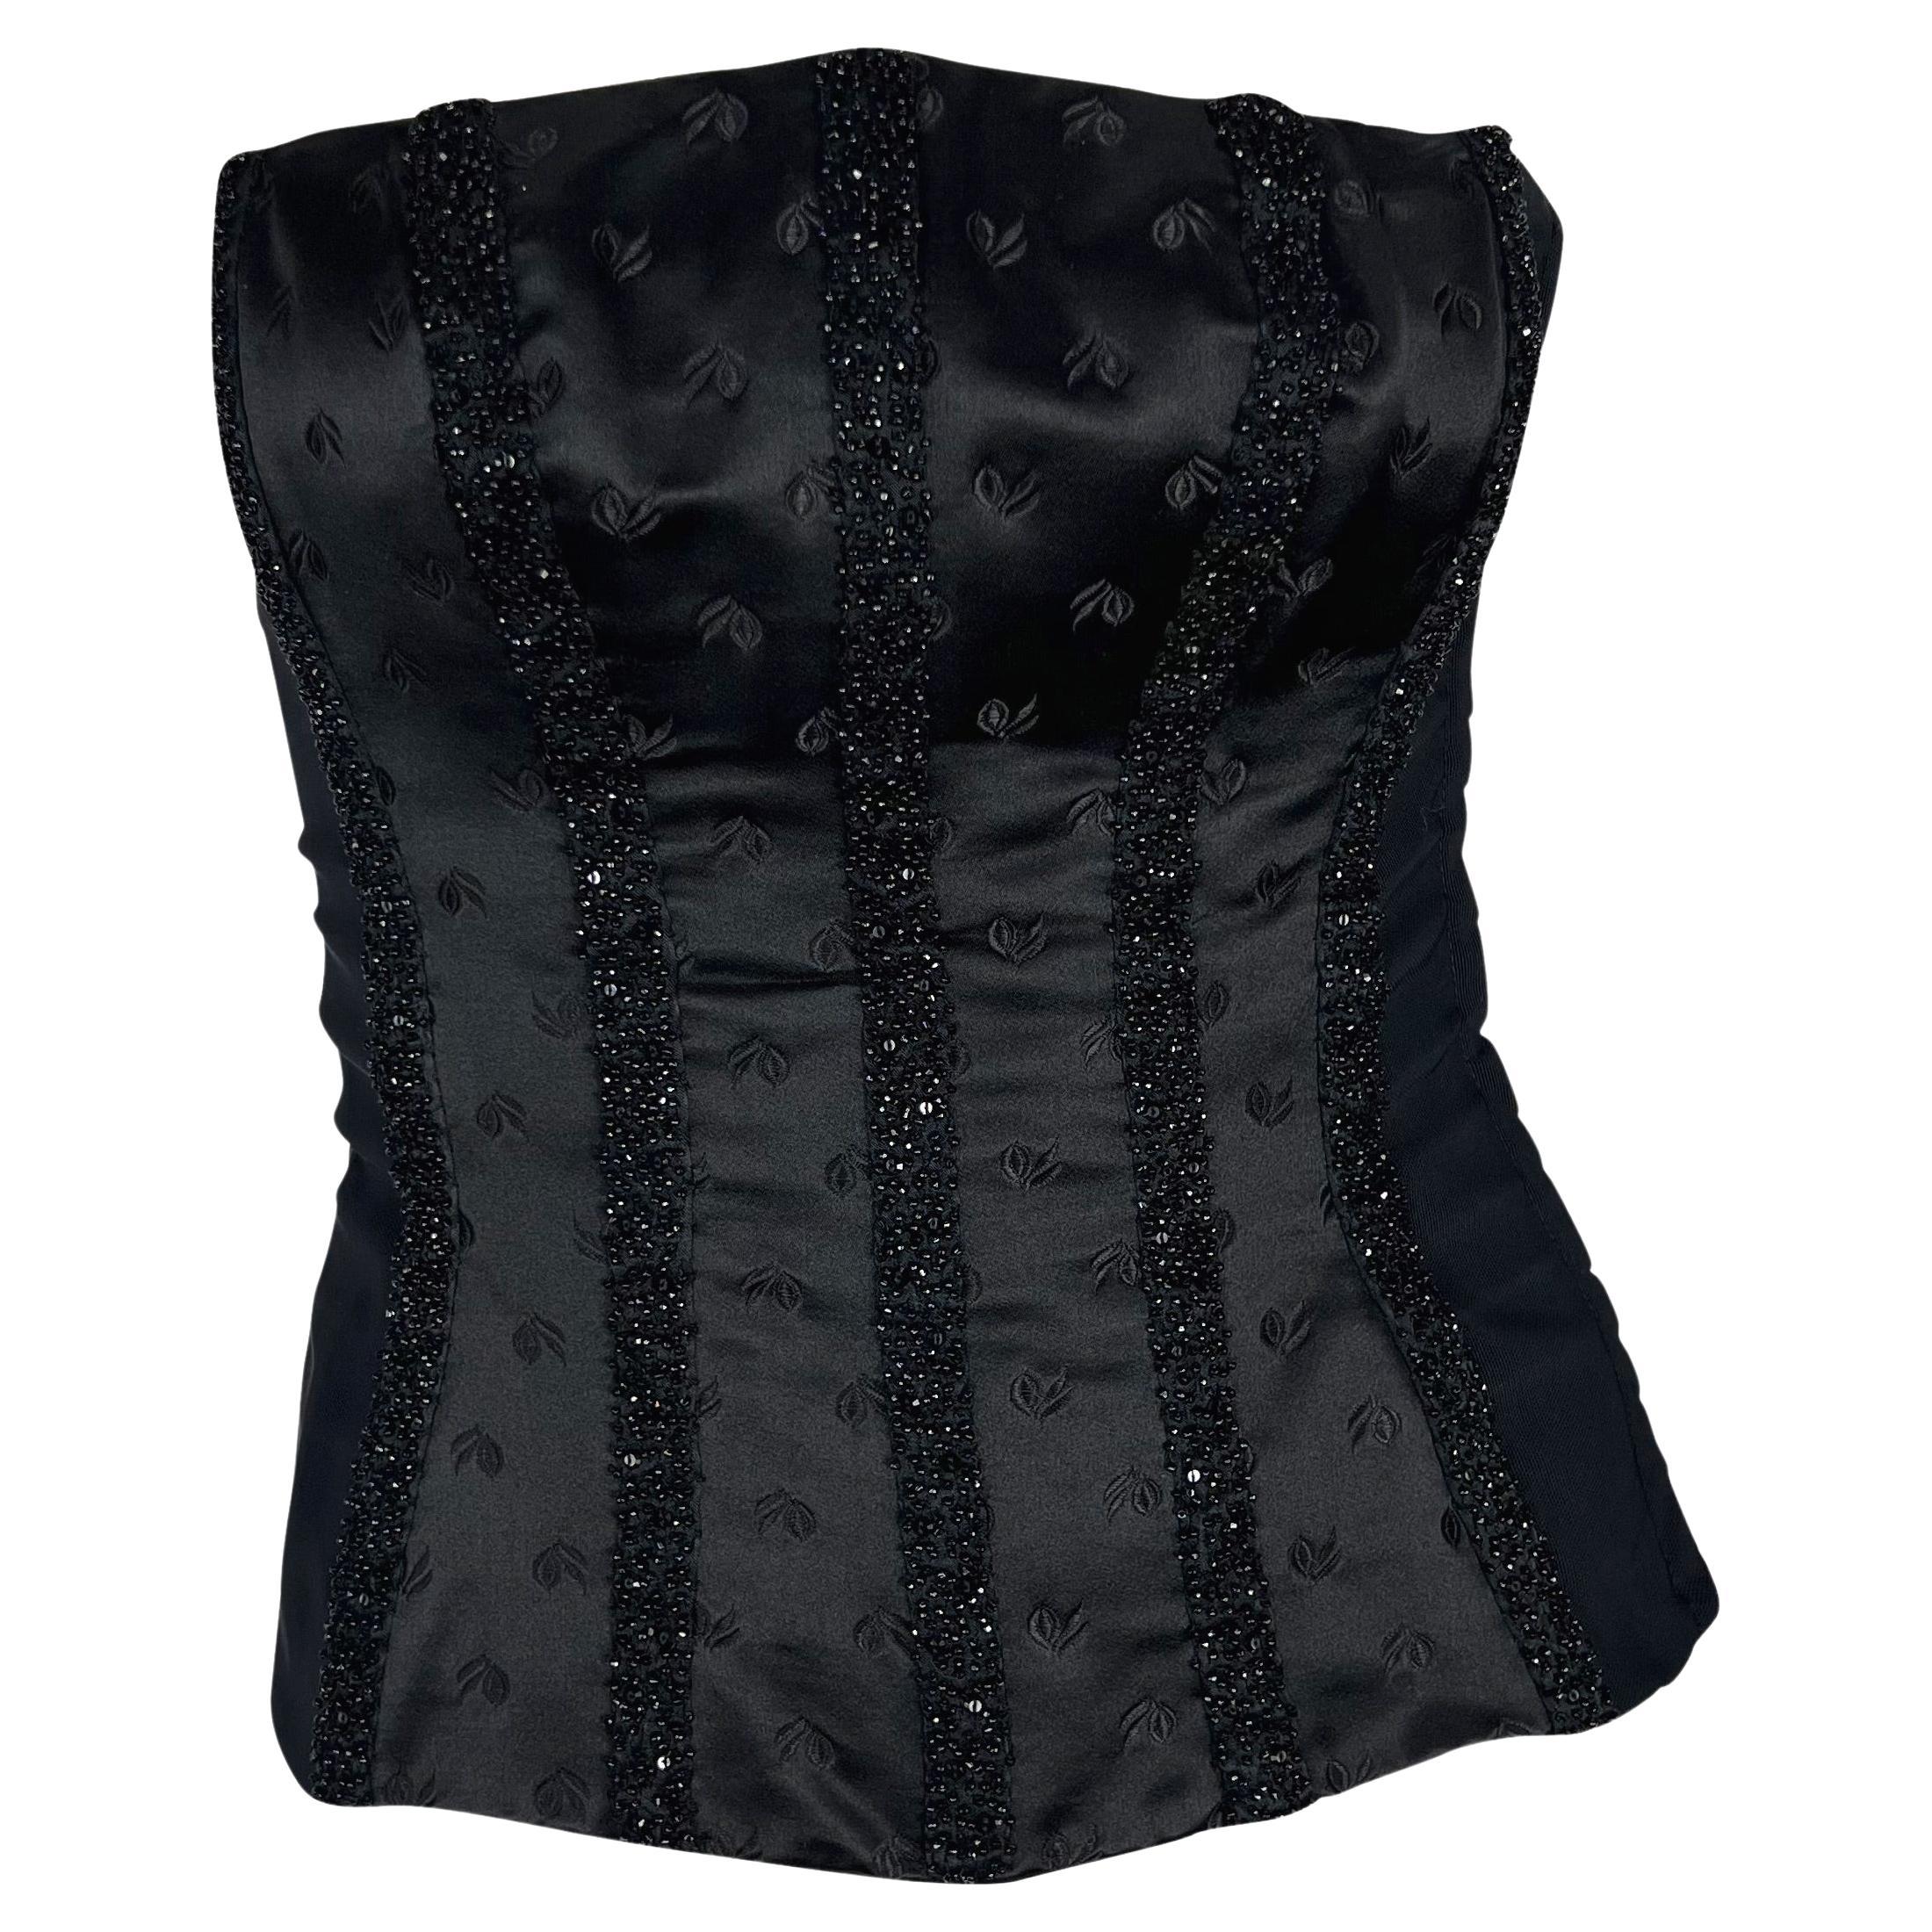 S/S 2001 Gianni Versace by Donatella Black Beaded Panel Bustier Corset Top For Sale